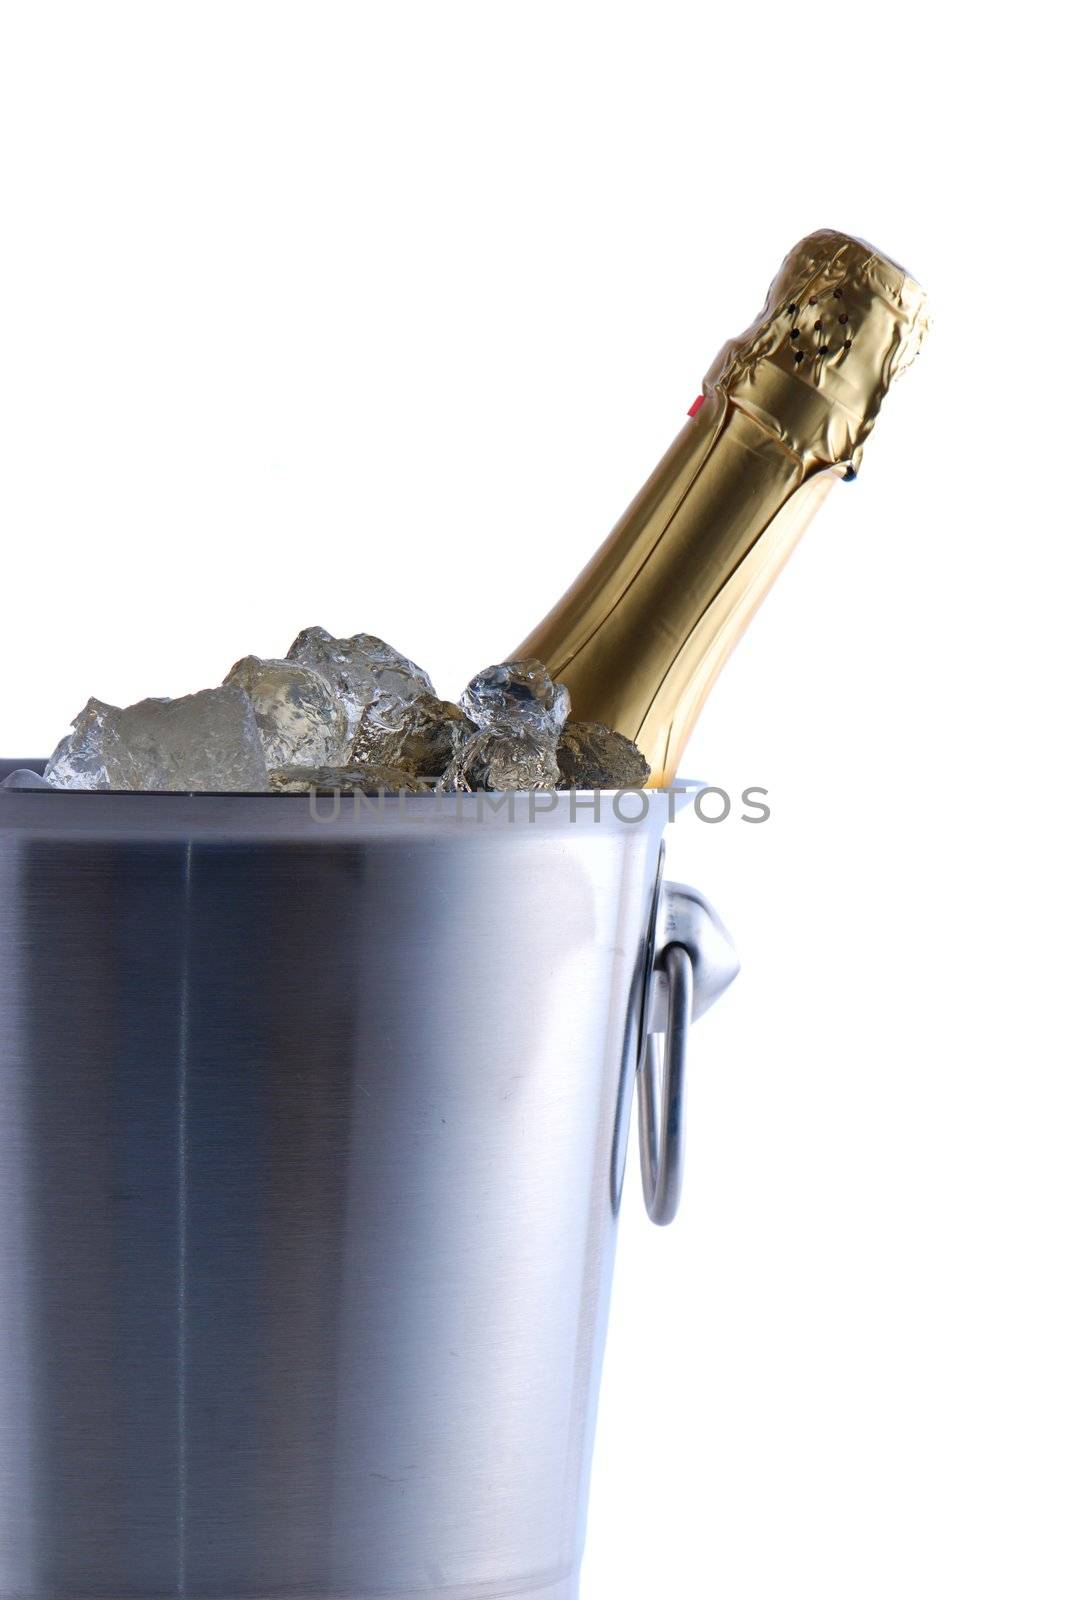 Champagne cooler isolated on white